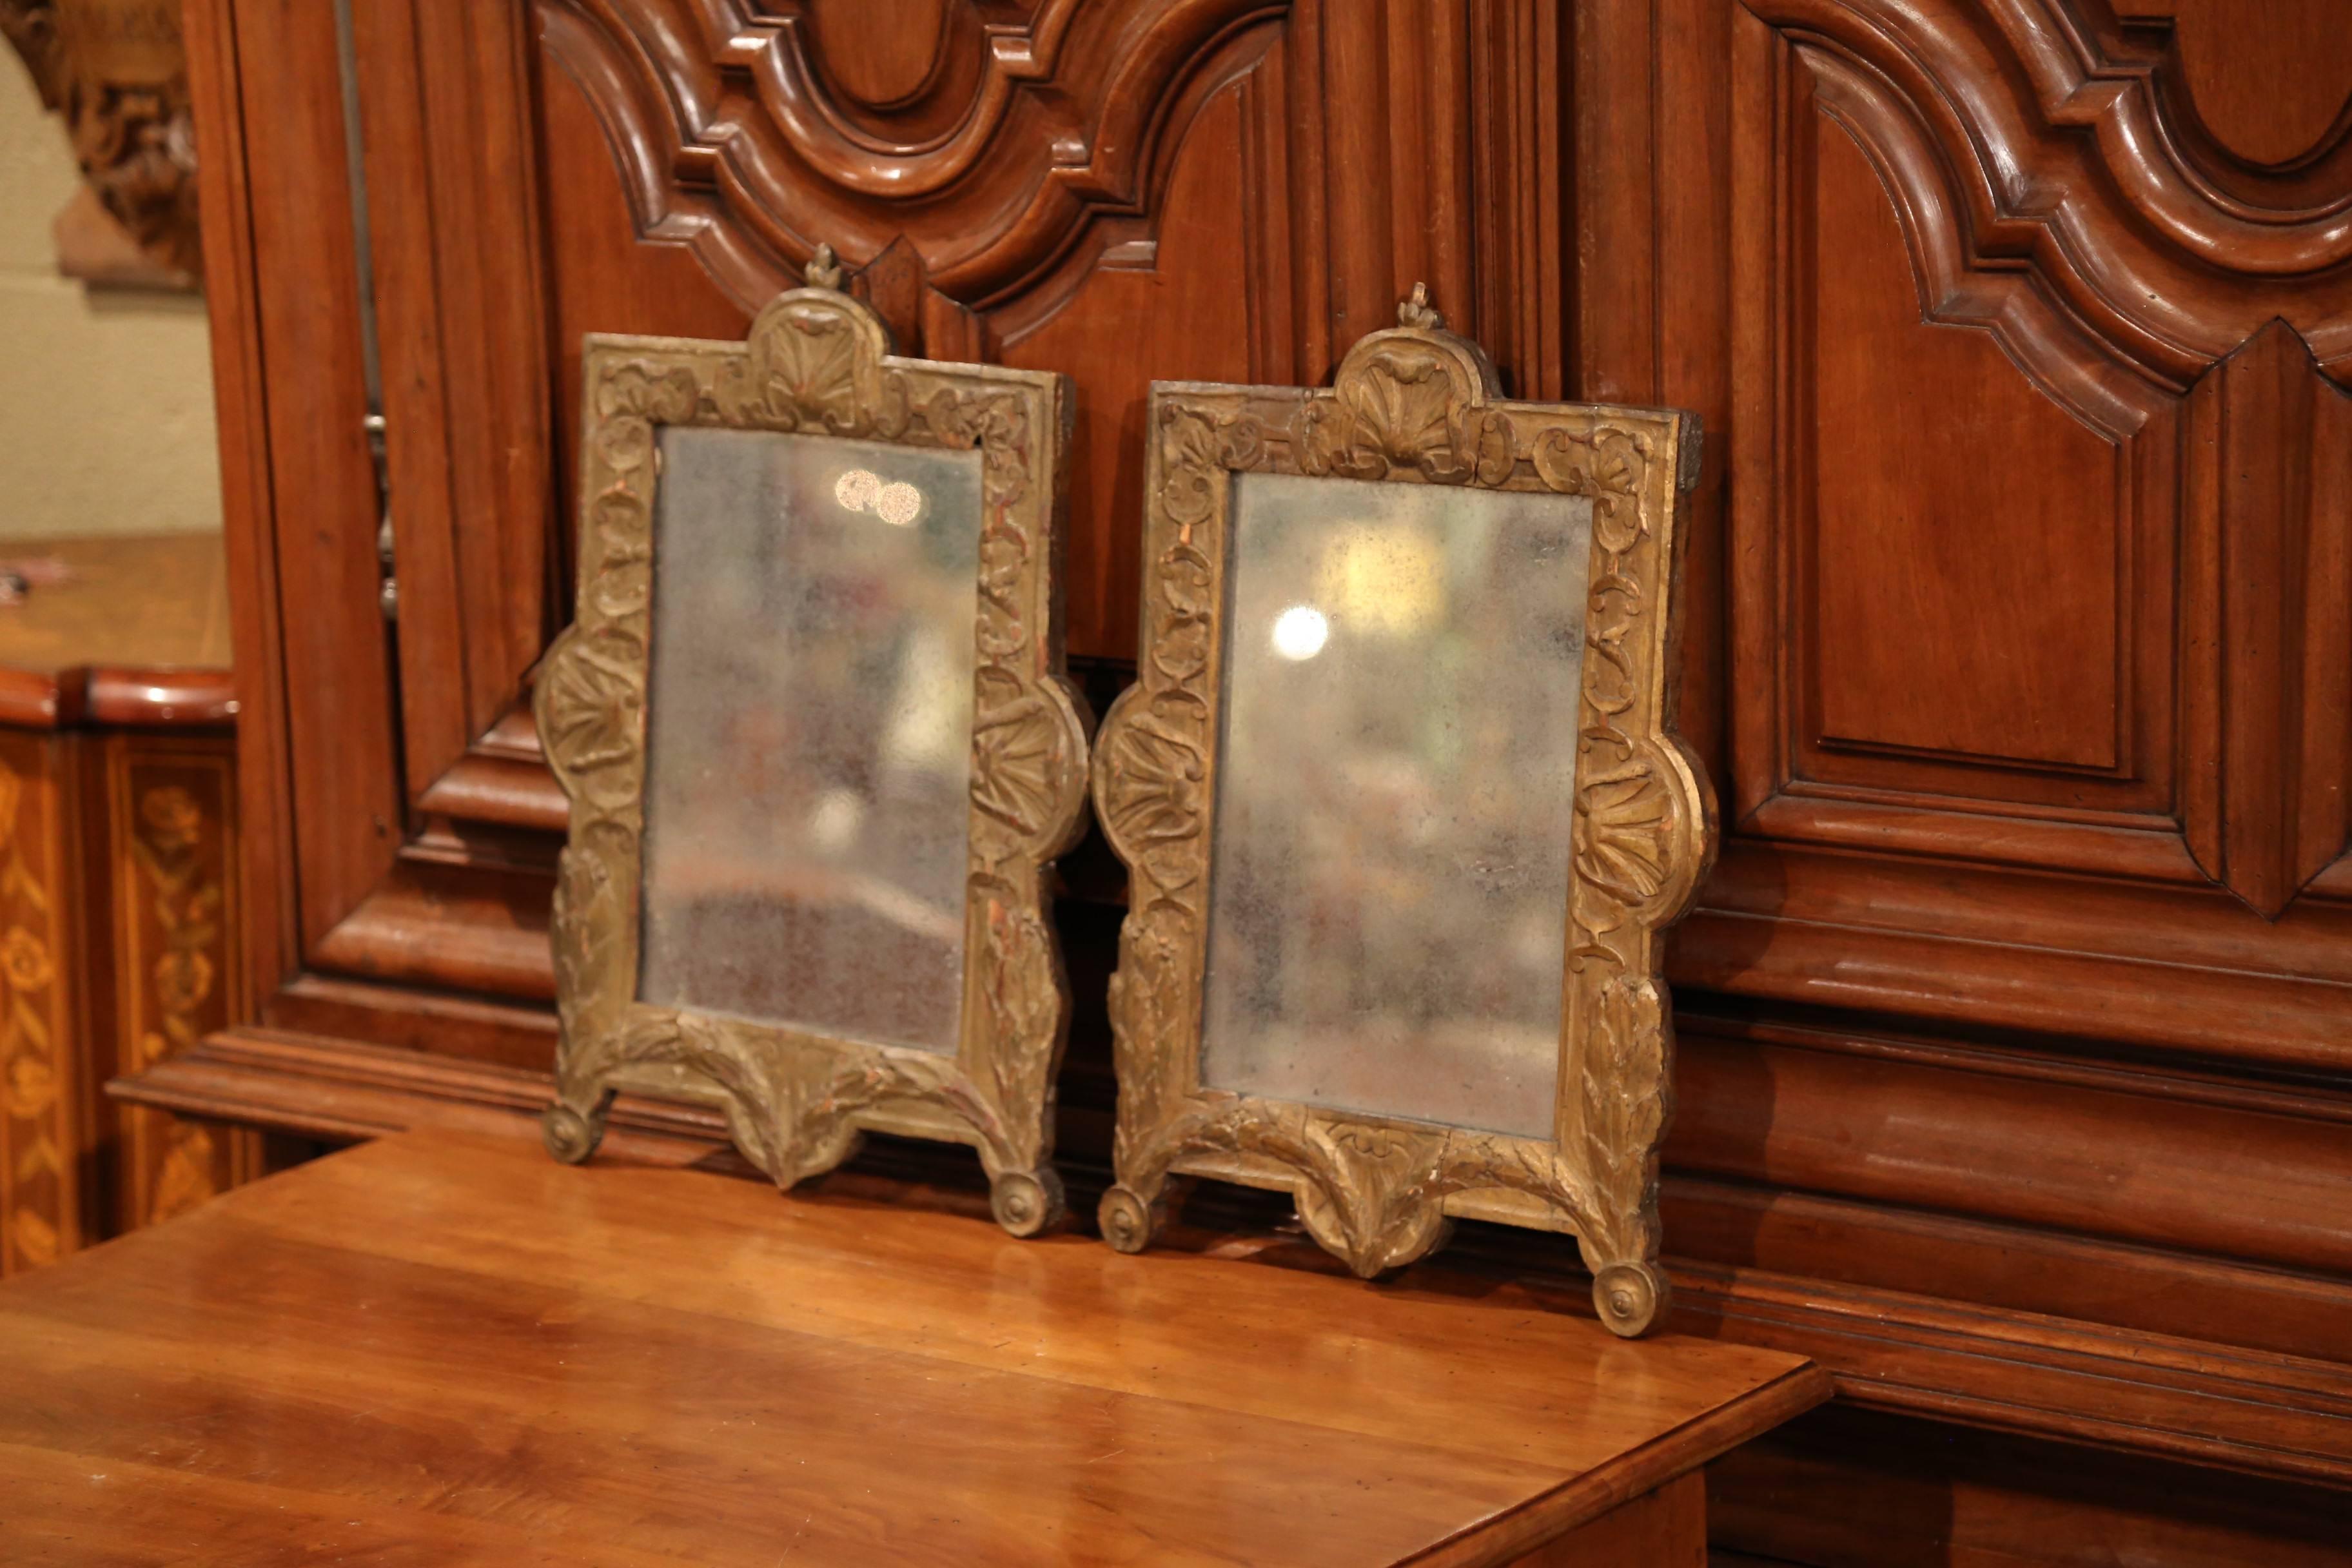 Elegant pair of antique wall mirrors from Southern France, crafted circa 1780, the fruitwood pieces feature hand carved motifs including shell at the pediment, decorative round feet at the base and laurel leaves on the sides. They also have the